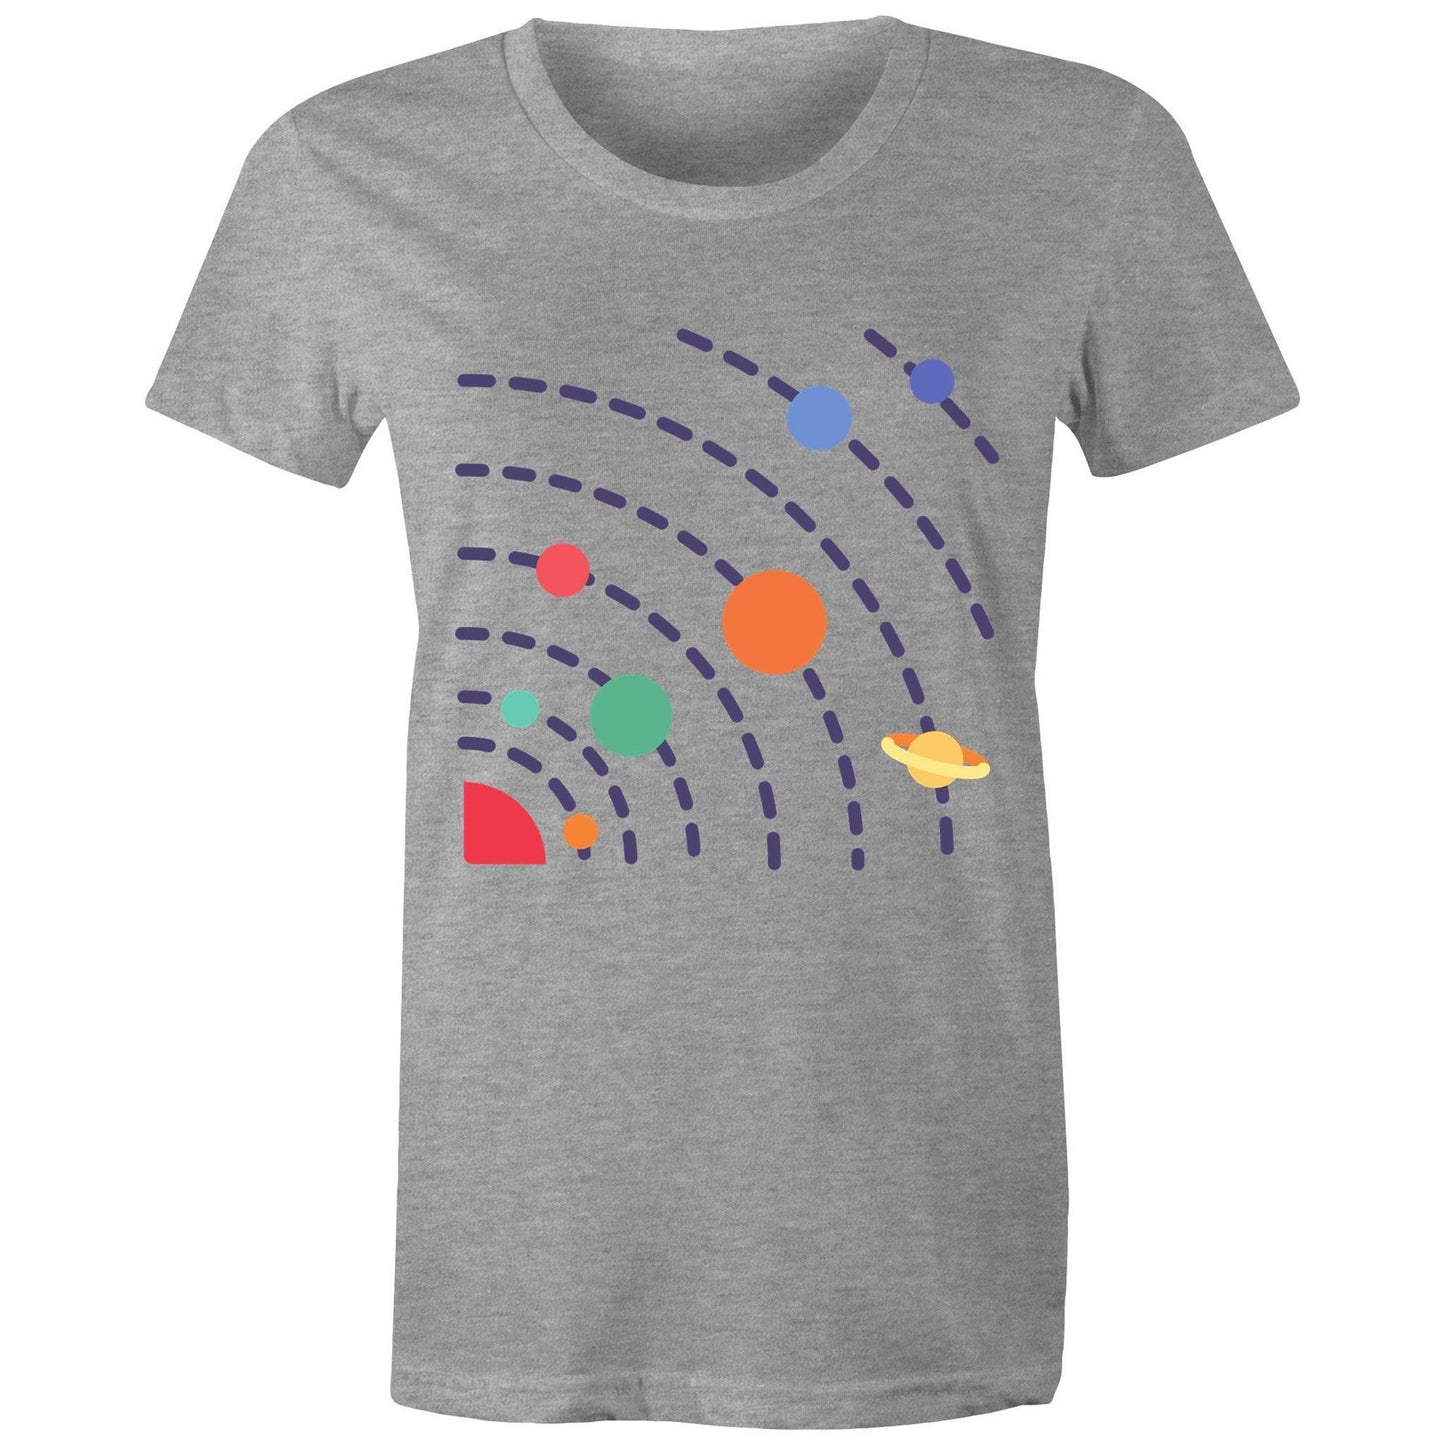 Solar System - Women's T-shirt Grey Marle Womens T-shirt Science Space Womens